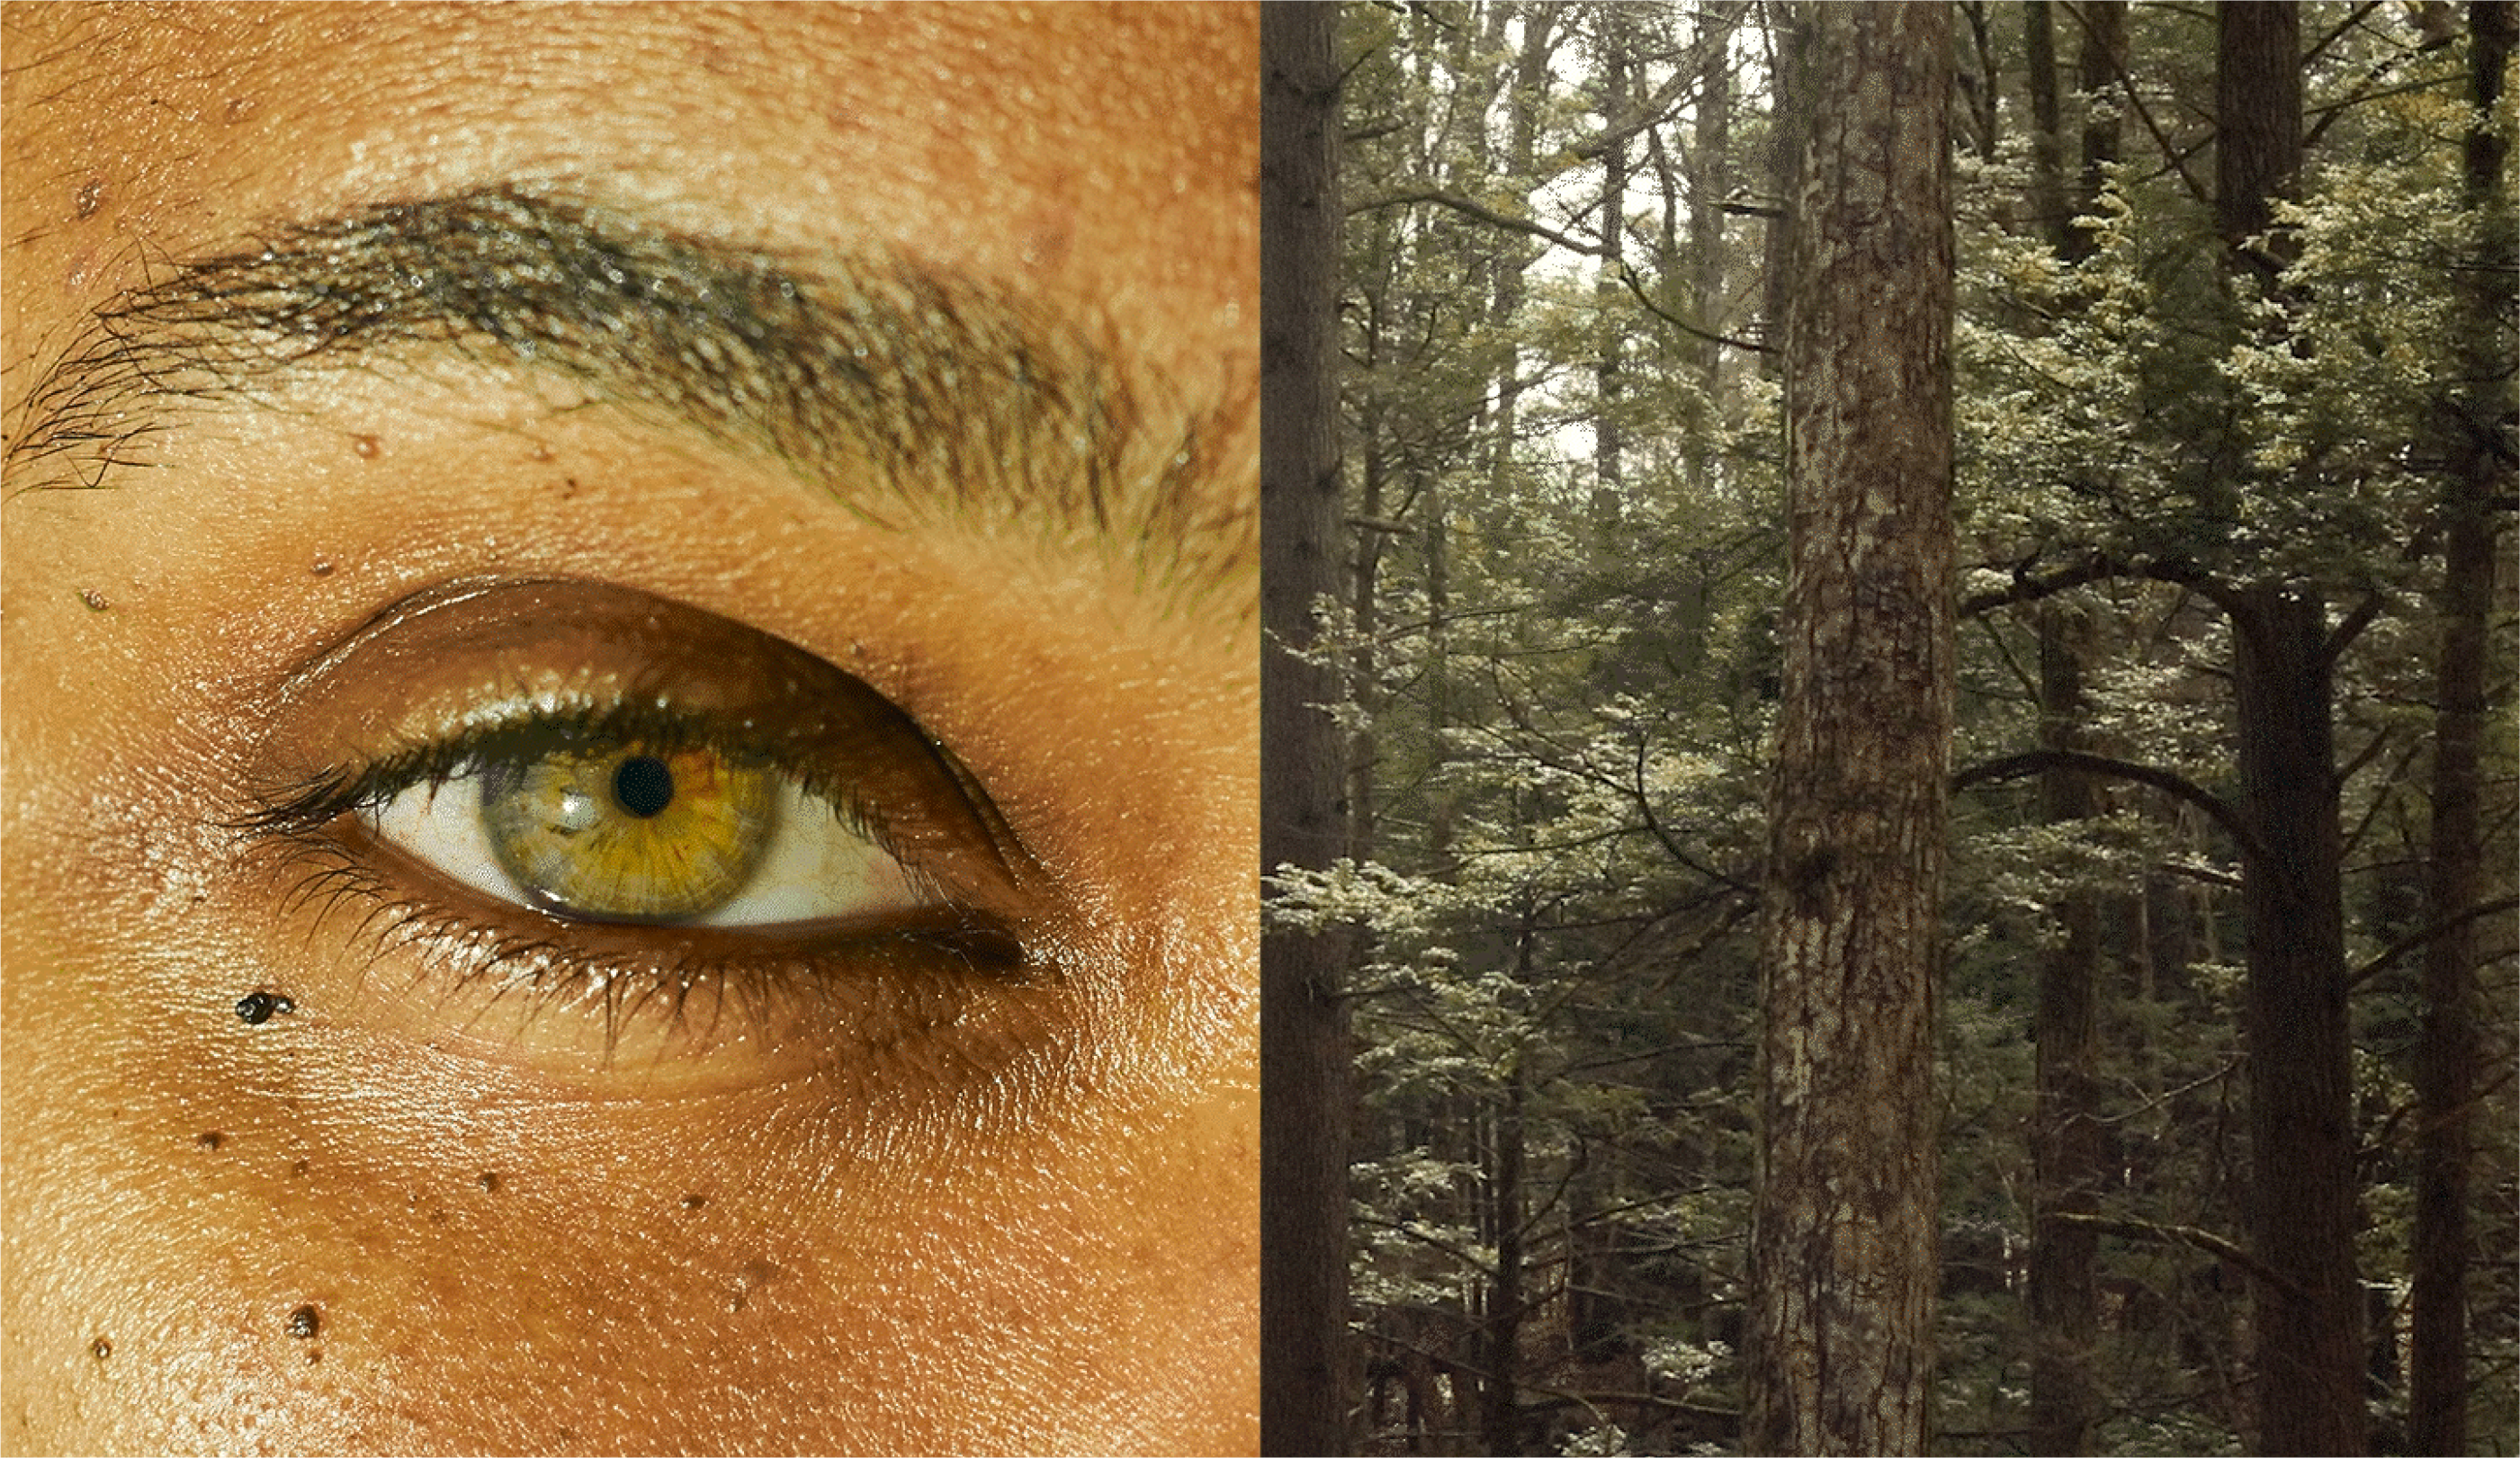 Diptych of a human eye and a forest